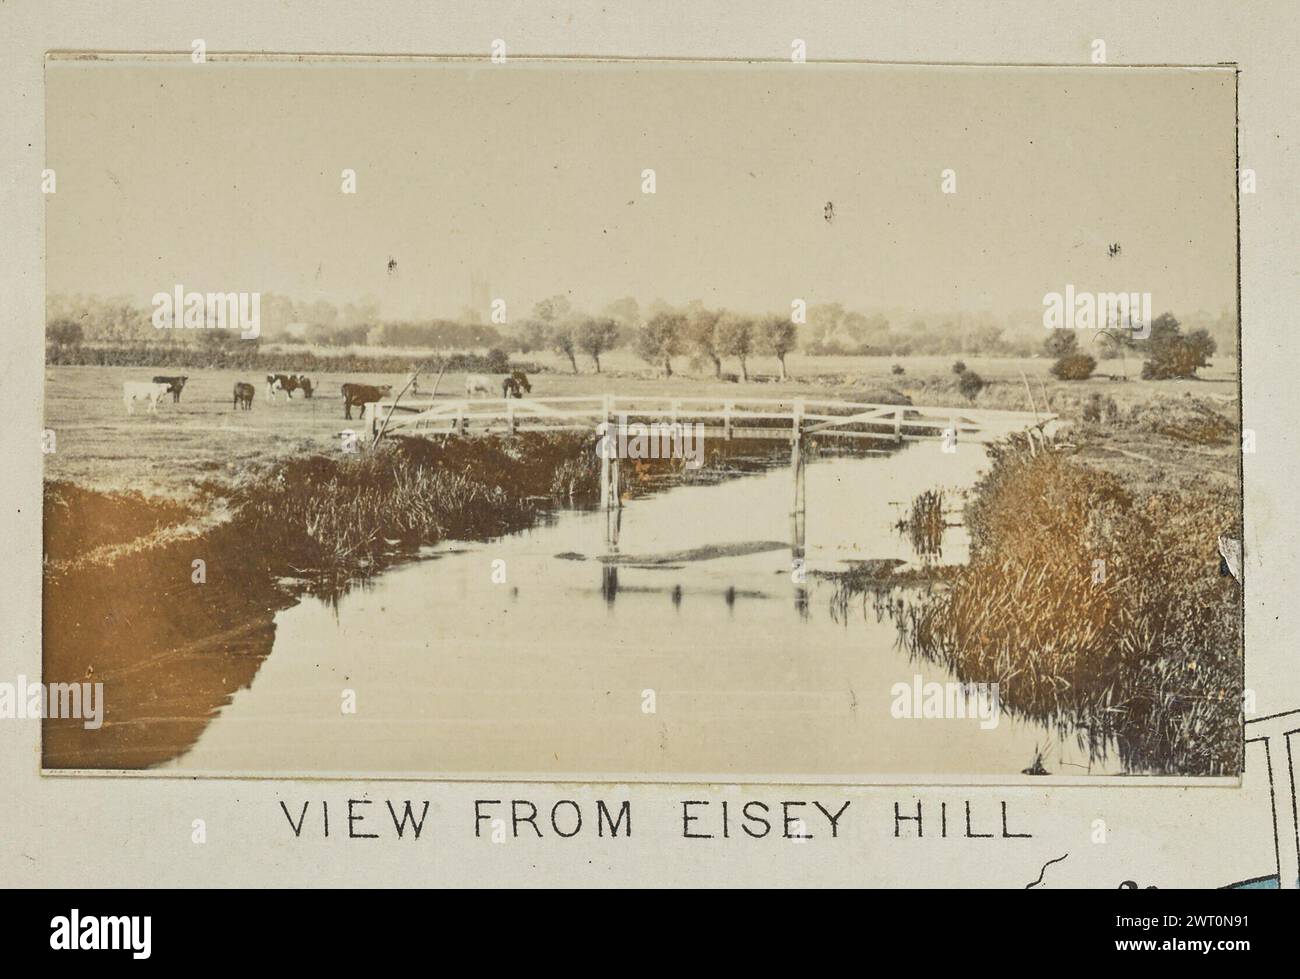 View from Eisey Hill. Henry W. Taunt, photographer (British, 1842 - 1922) 1897 One of three tipped-in photographs illustrating a printed map of Castle Eaton, Kempsford, and the surrounding area along the River Thames. The photograph shows a view of a wooden footbridge over a narrow stretch of the river near Cricklade. Cows graze in the field beside the river on the left side of the image. (Recto, mount) lower center, below image, printed in black ink: 'VIEW FROM EISEY HILL' Stock Photo